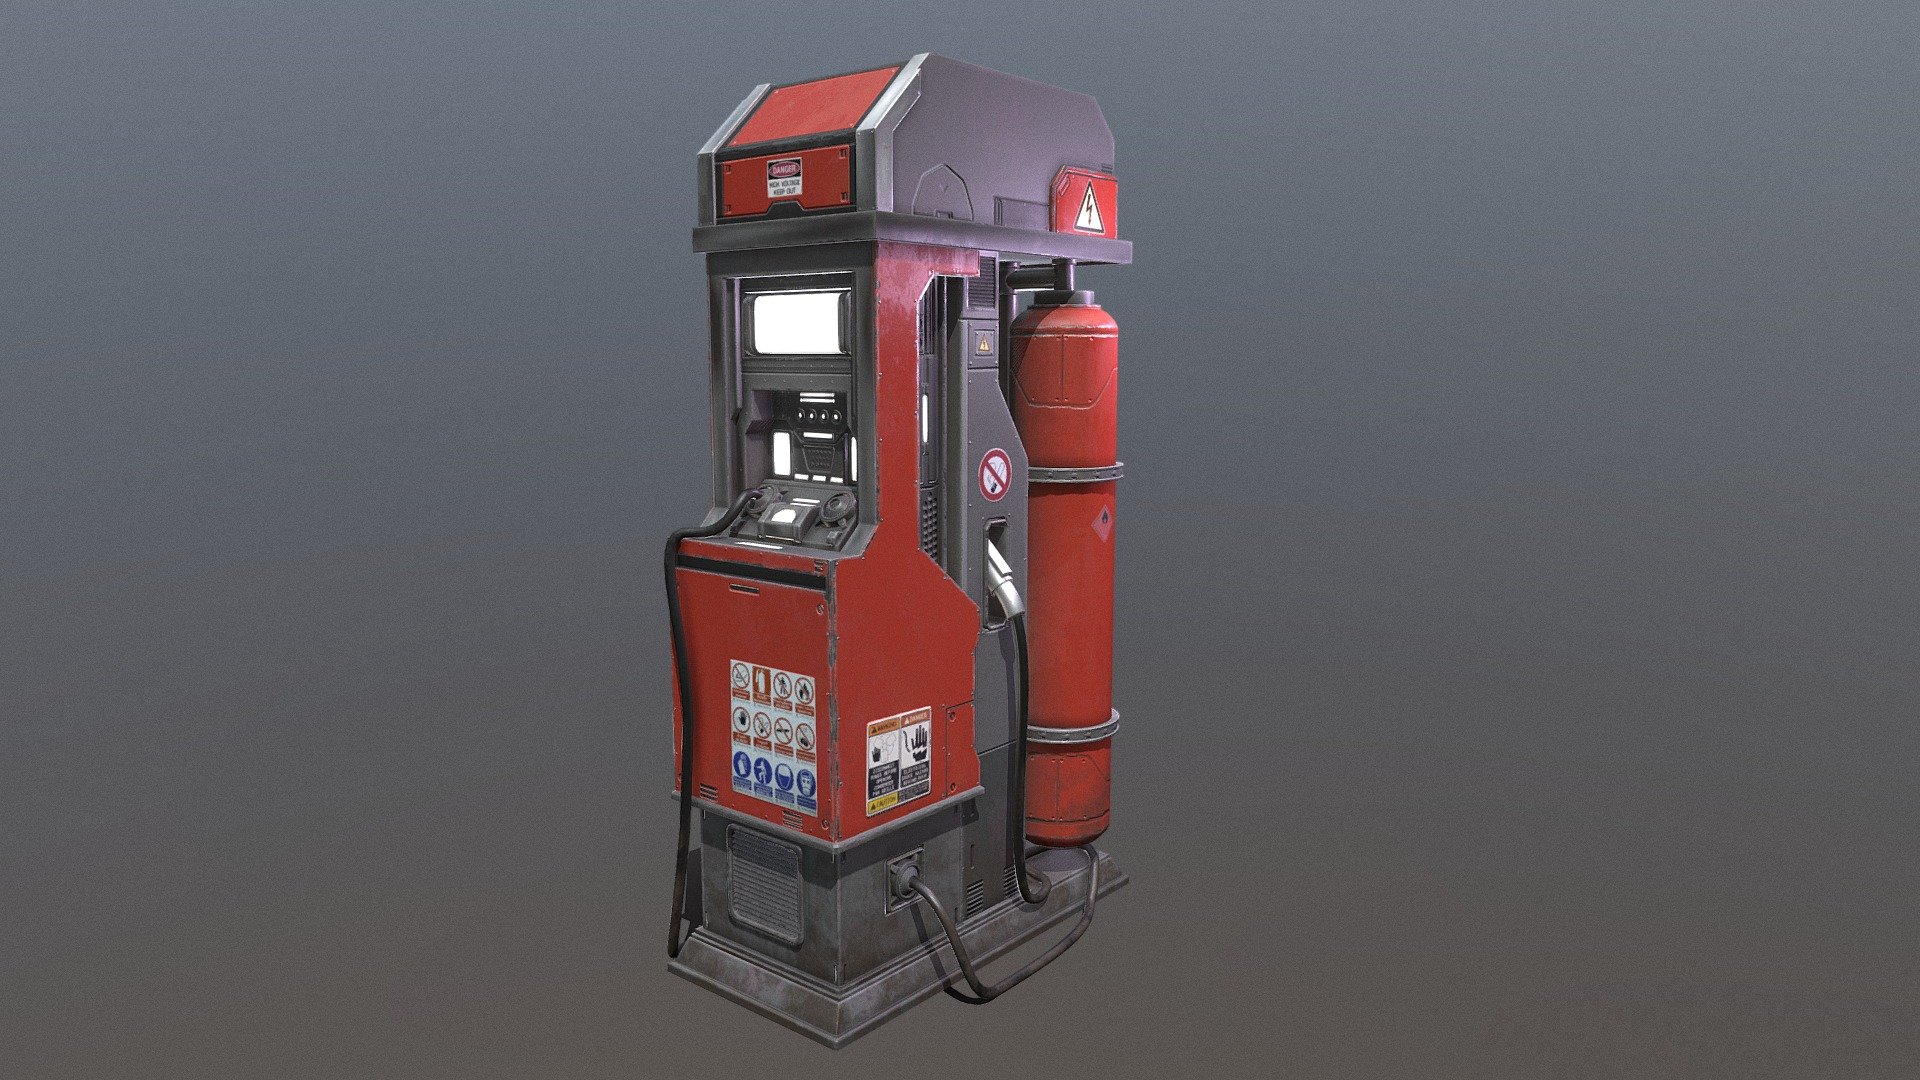 Following tutorial by Emiel Sleegers. Make 20% of work, giving 80% of result. Ready to move forward&hellip; - Gas Station - 3D model by UnicornAnton (@ivankomz10) 3d model